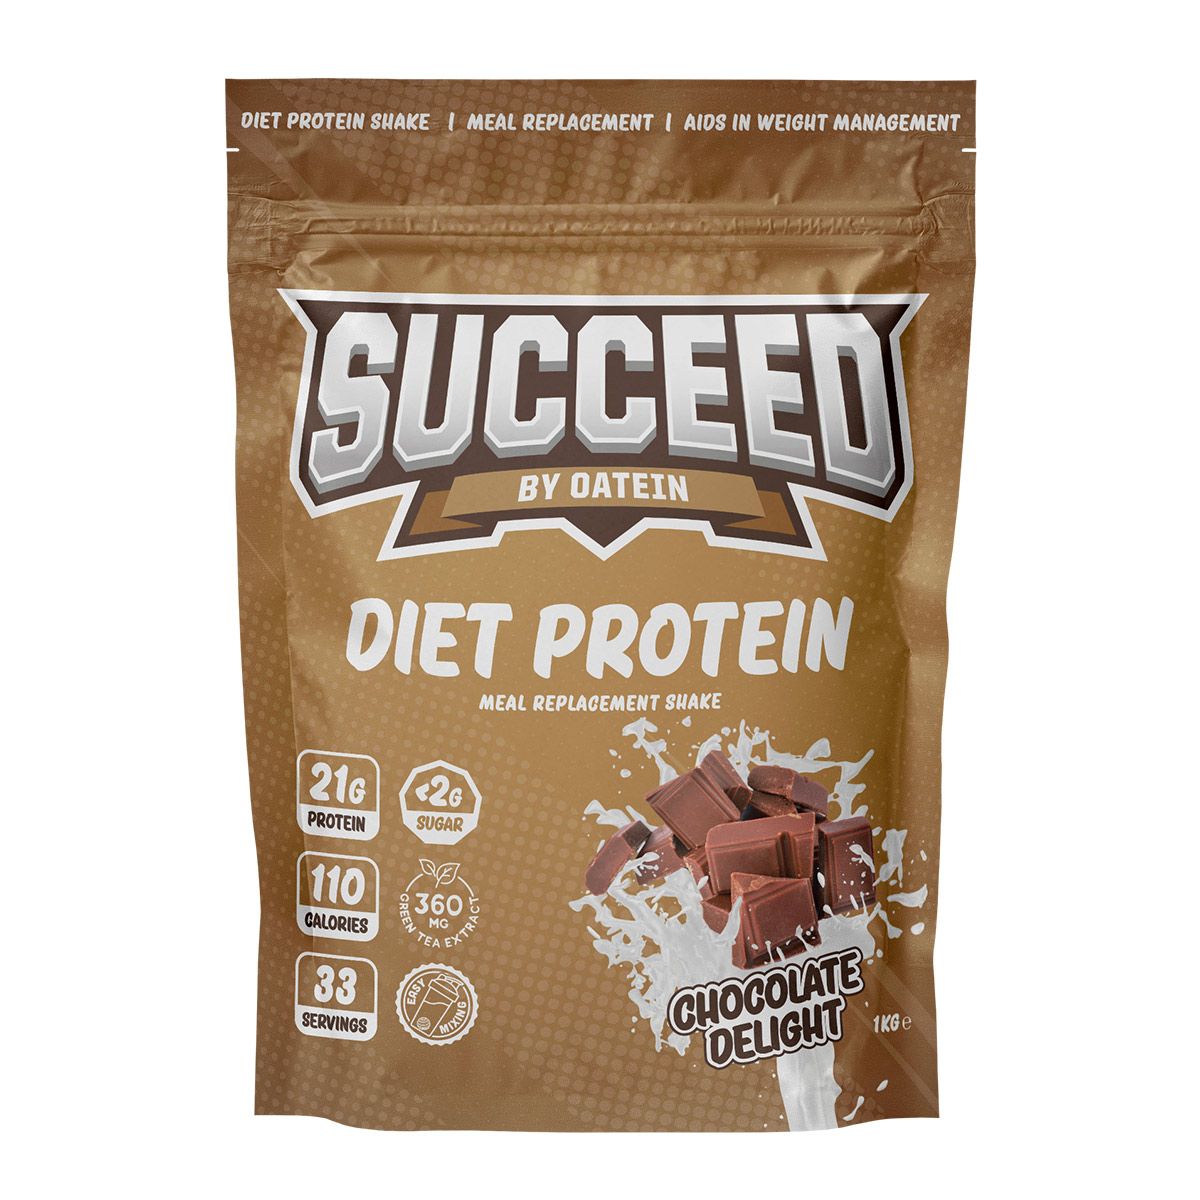 Oatein Succeed Diet Whey - Chocolate Delight 1kg